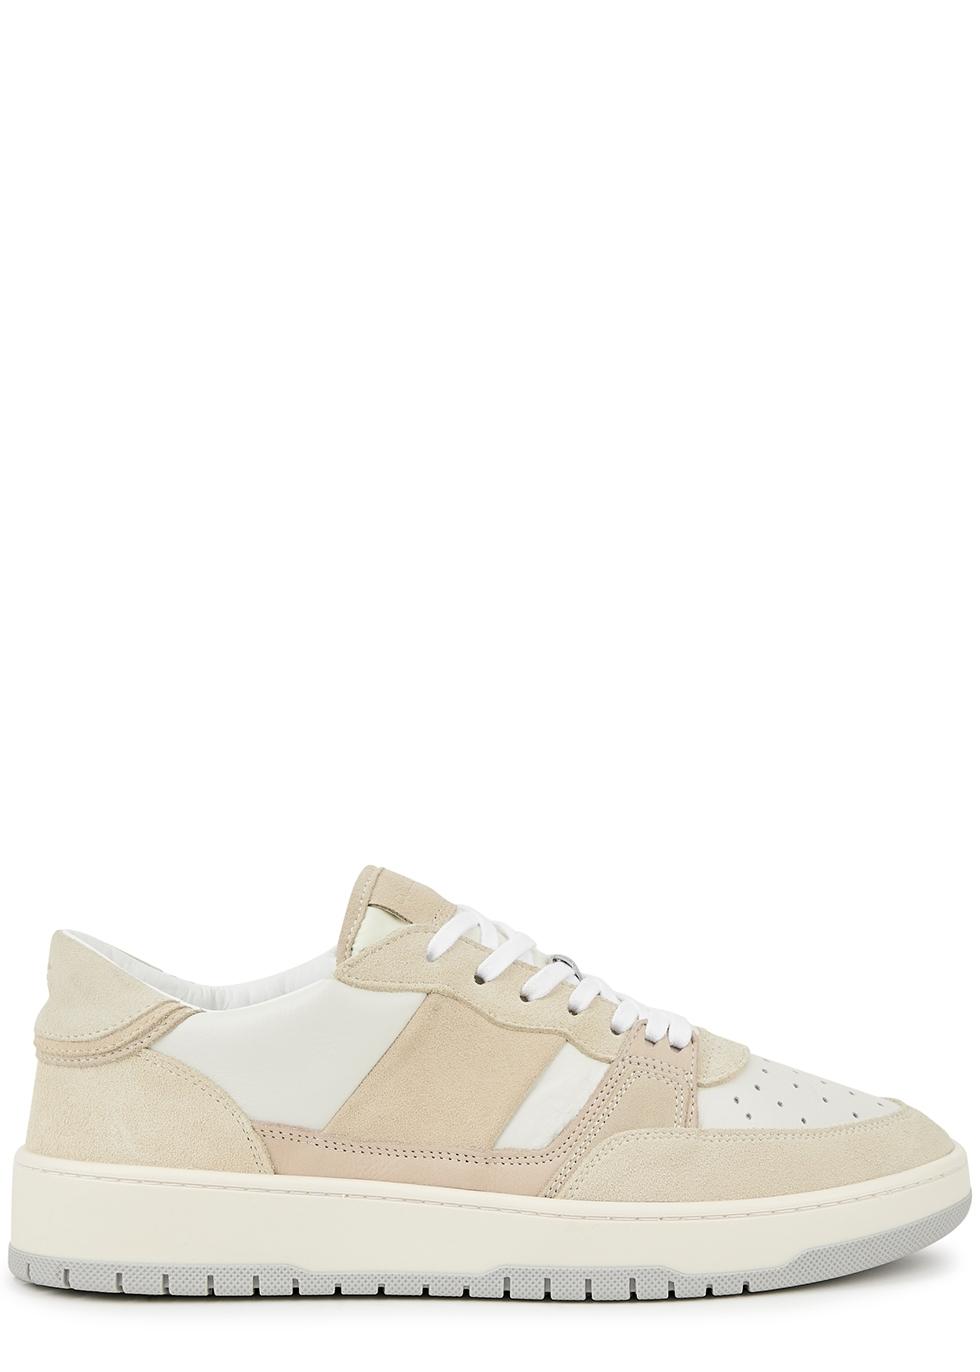 Collegium Pillar Alpha Panelled Leather Sneakers in White for Men | Lyst